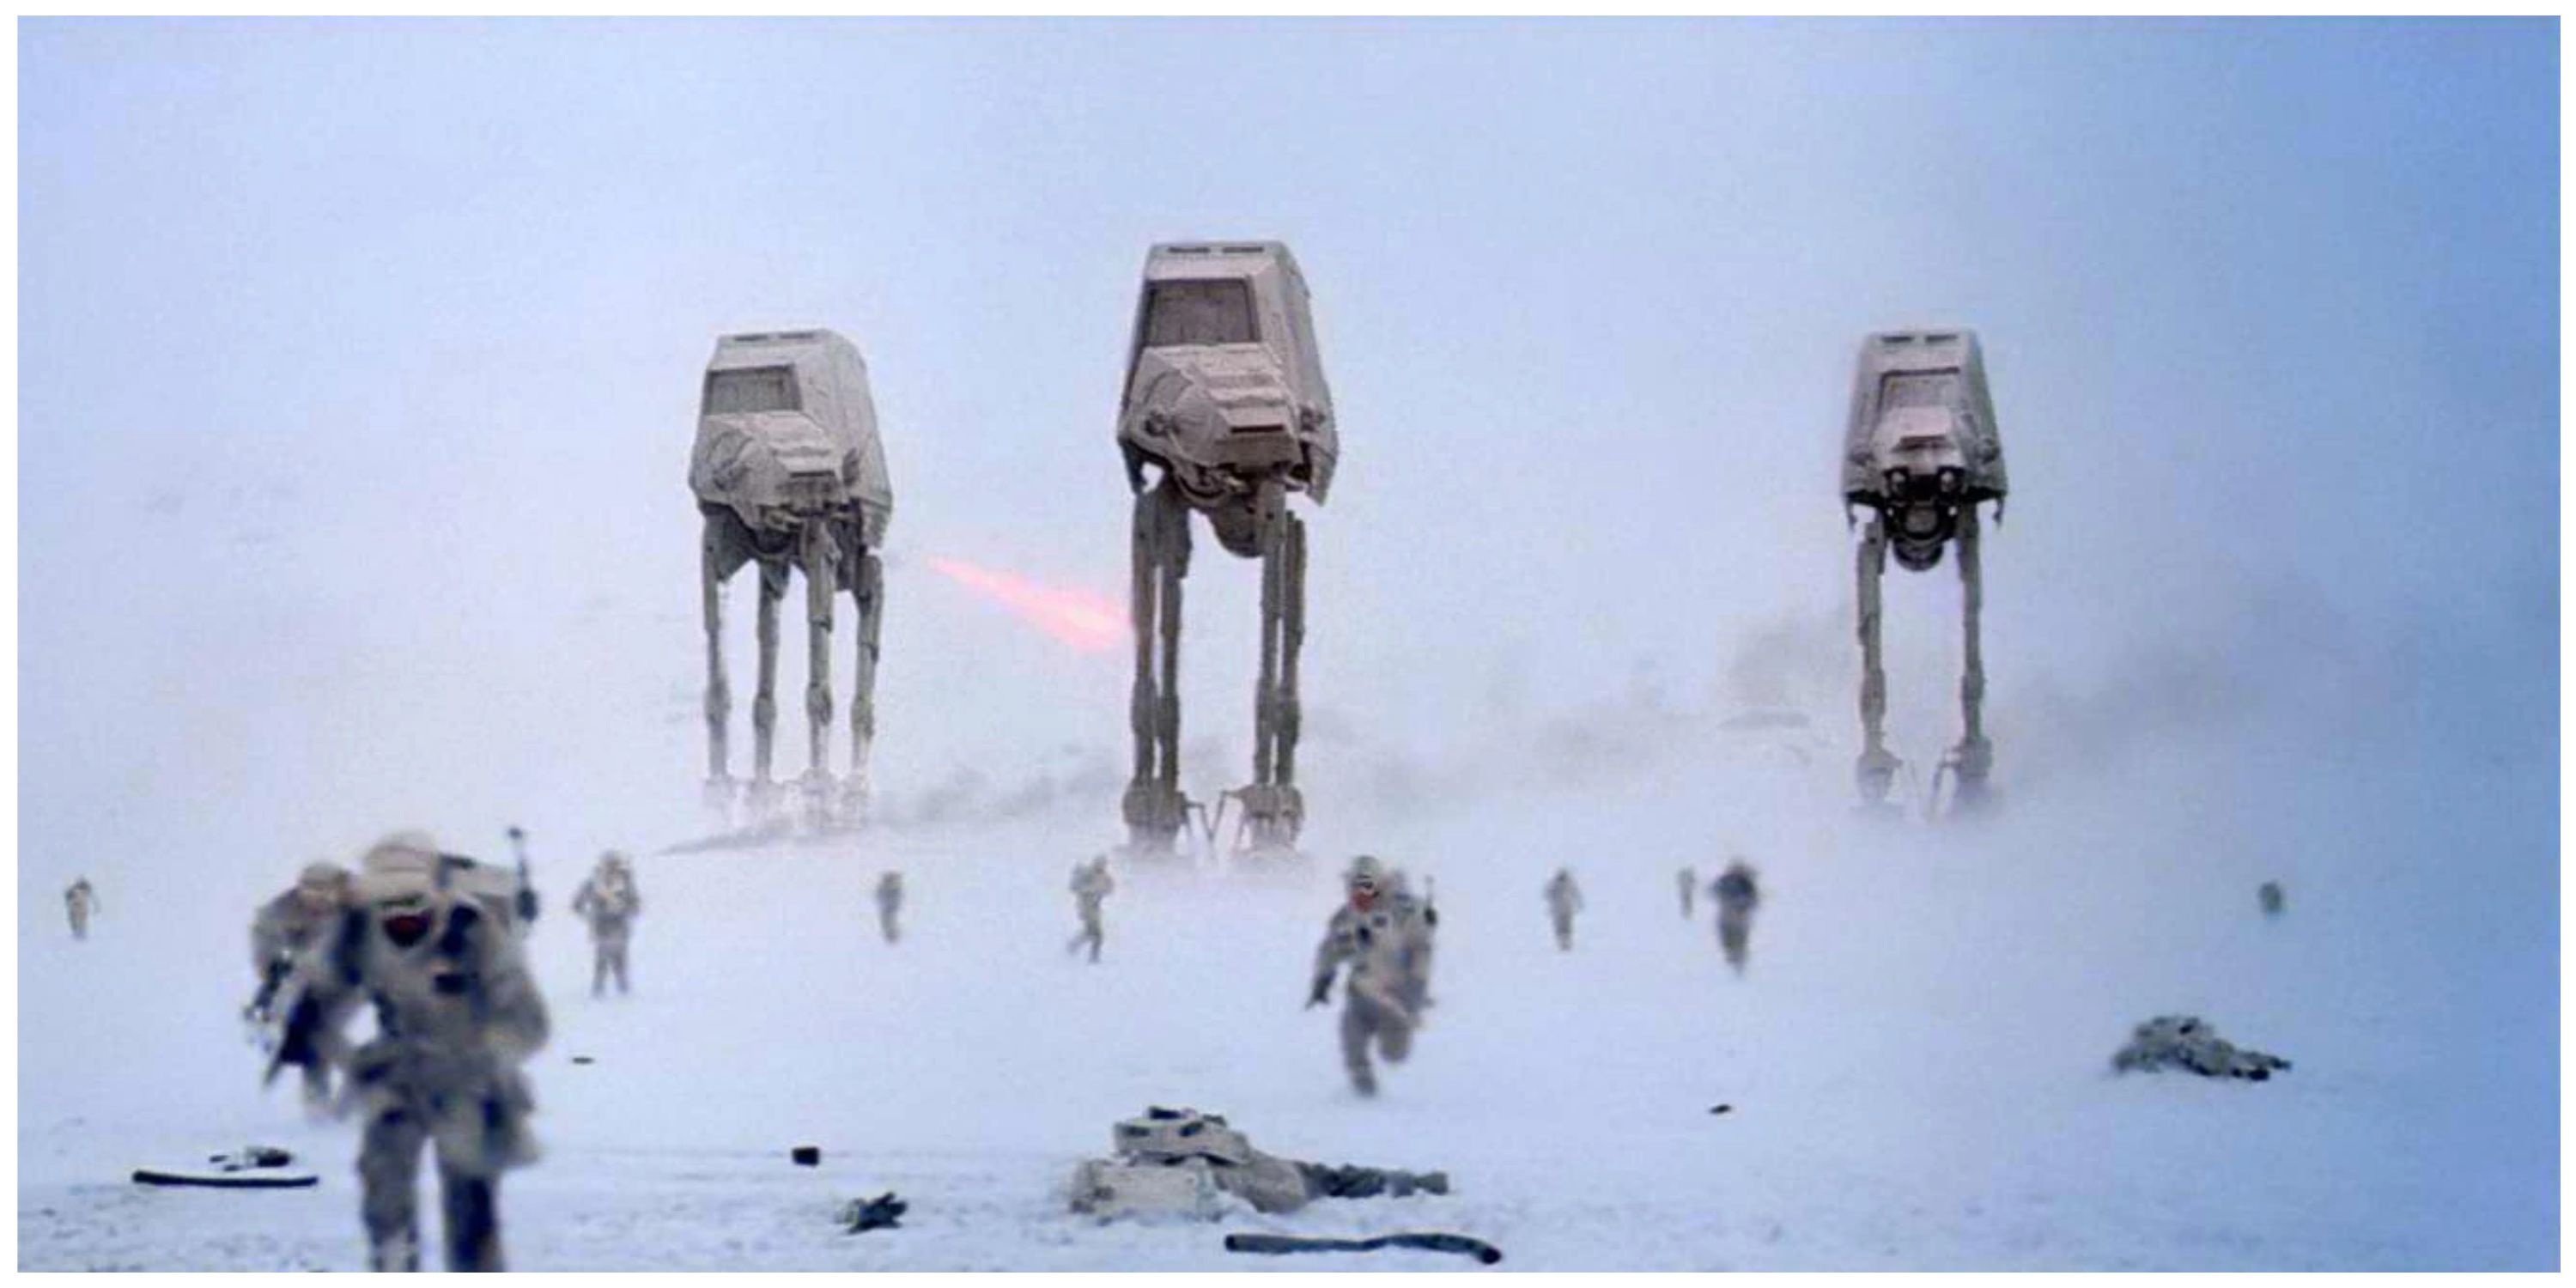 screenshot of the battle of hoth as seen in The Empire Strikes back